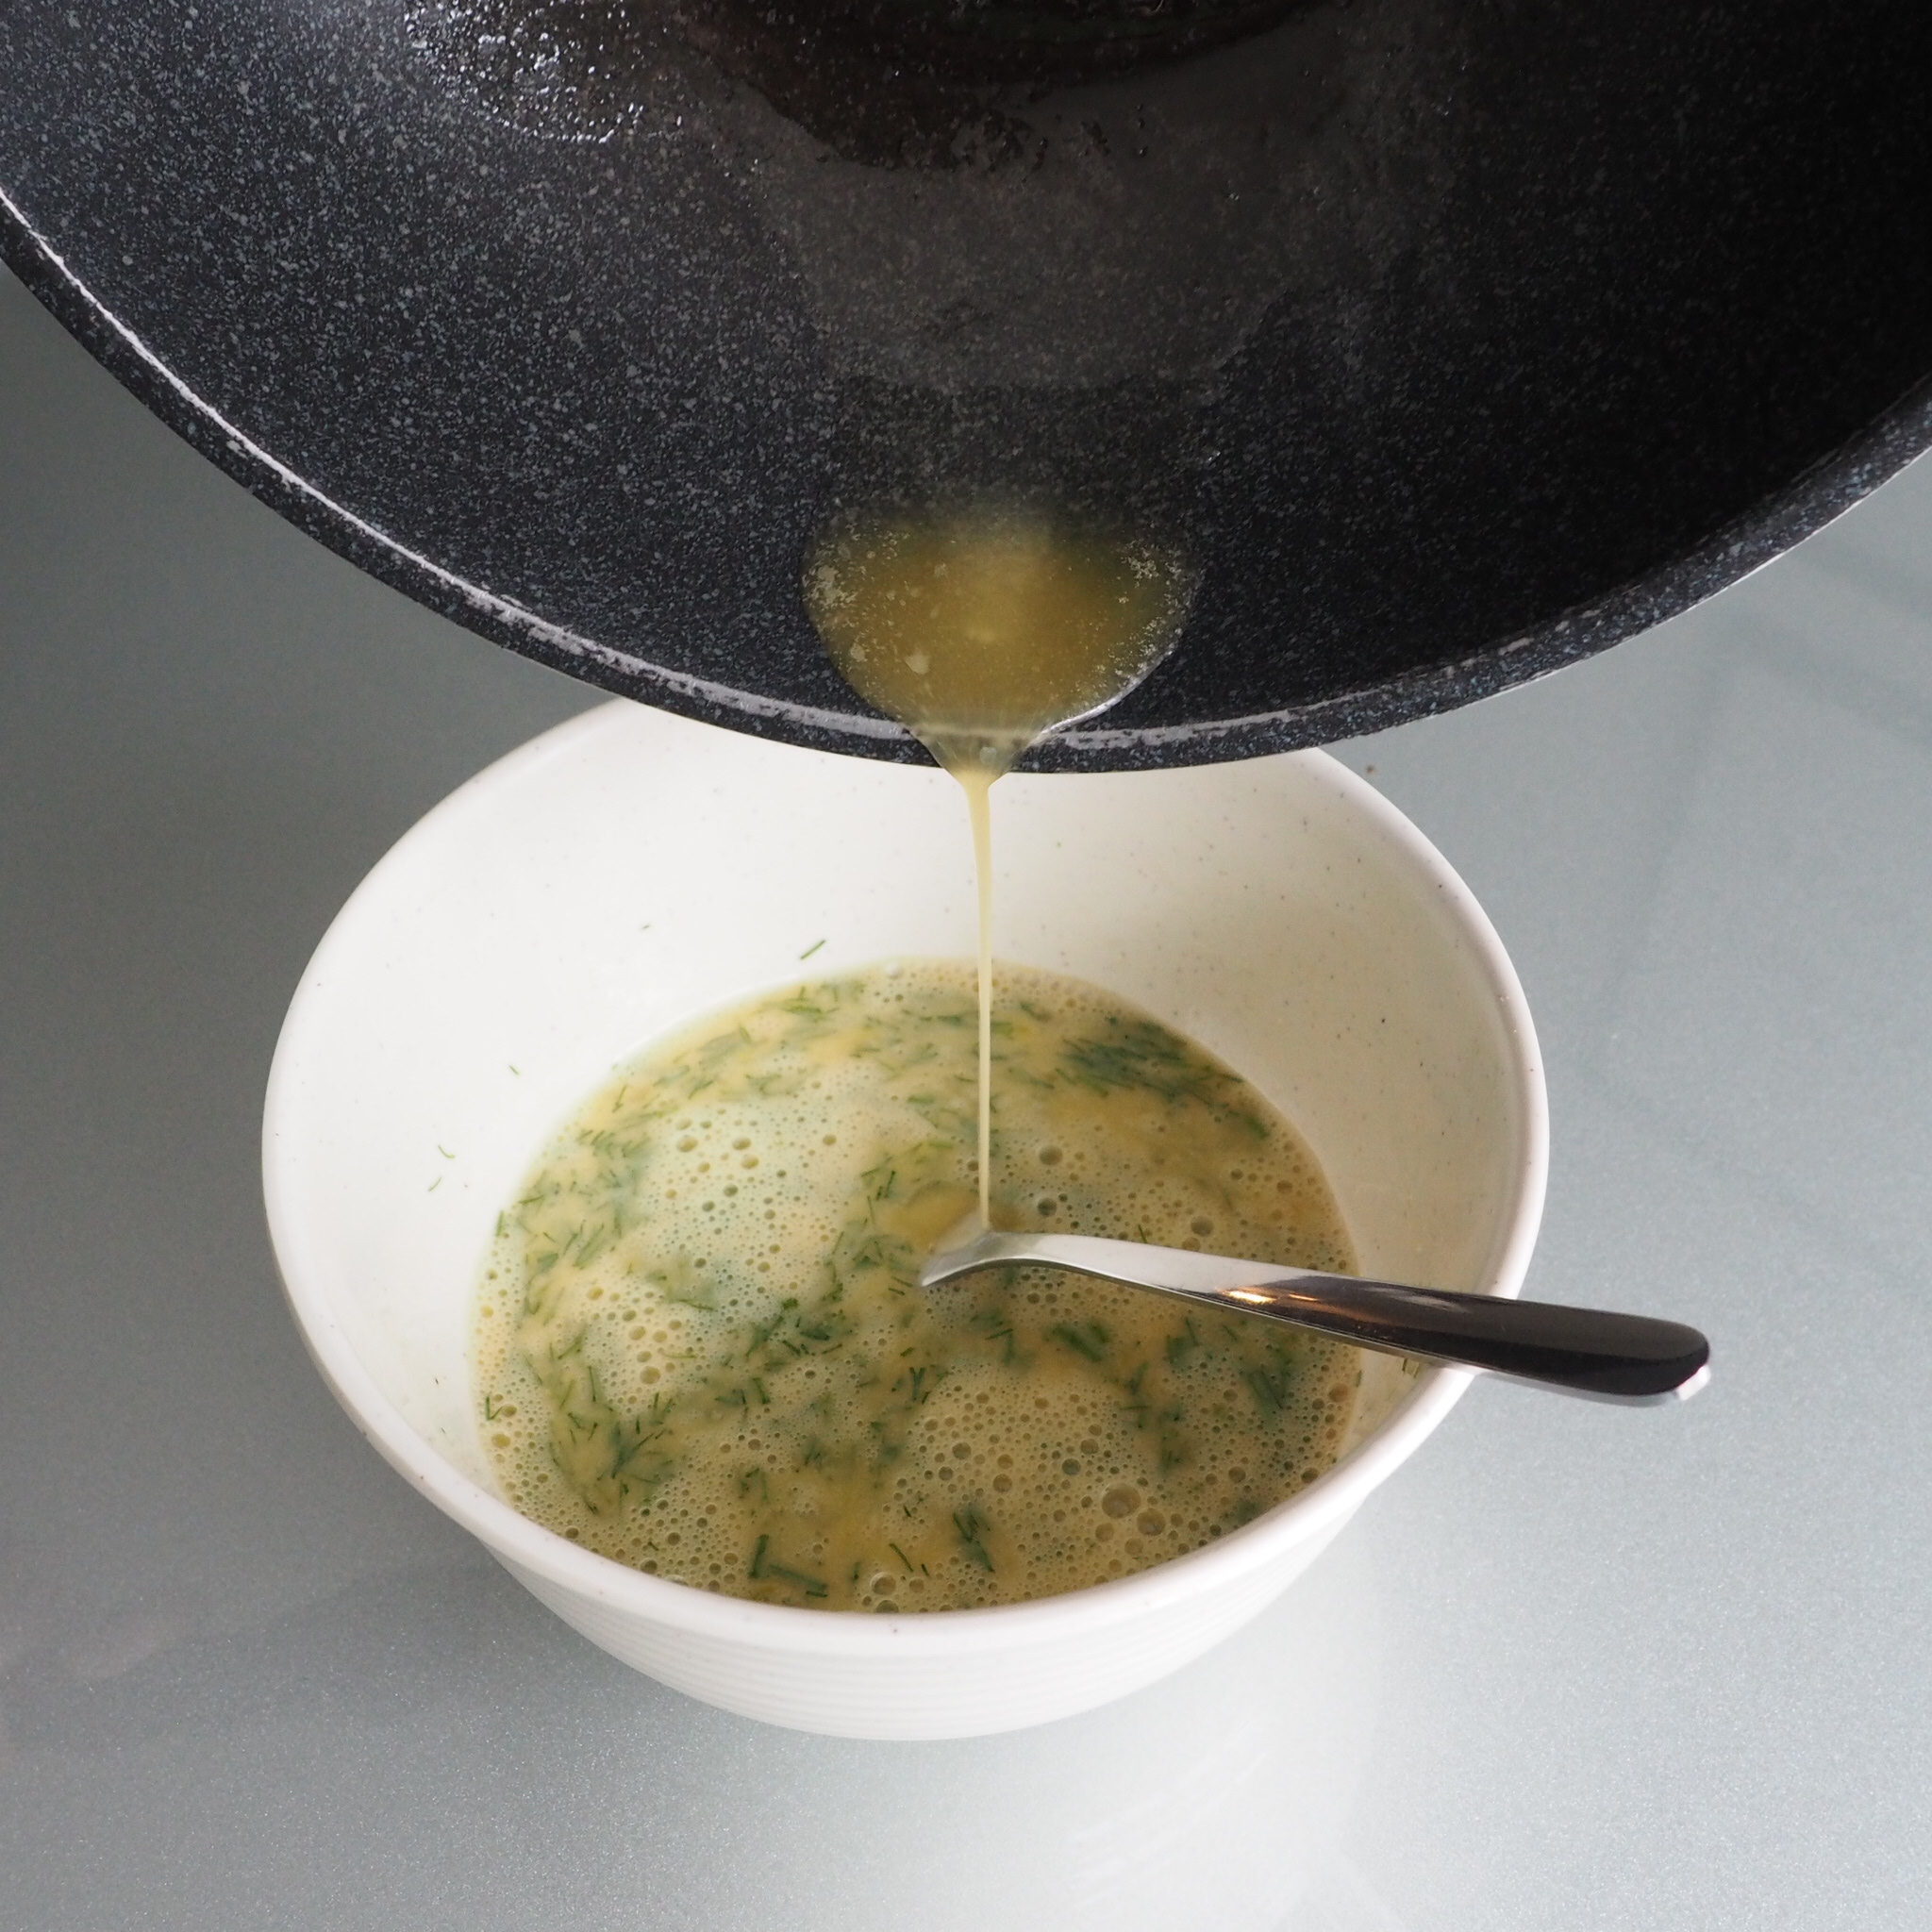  Step 2: Add in 1 teaspoon of melted vegan butter or oil into your scrambled eggs 